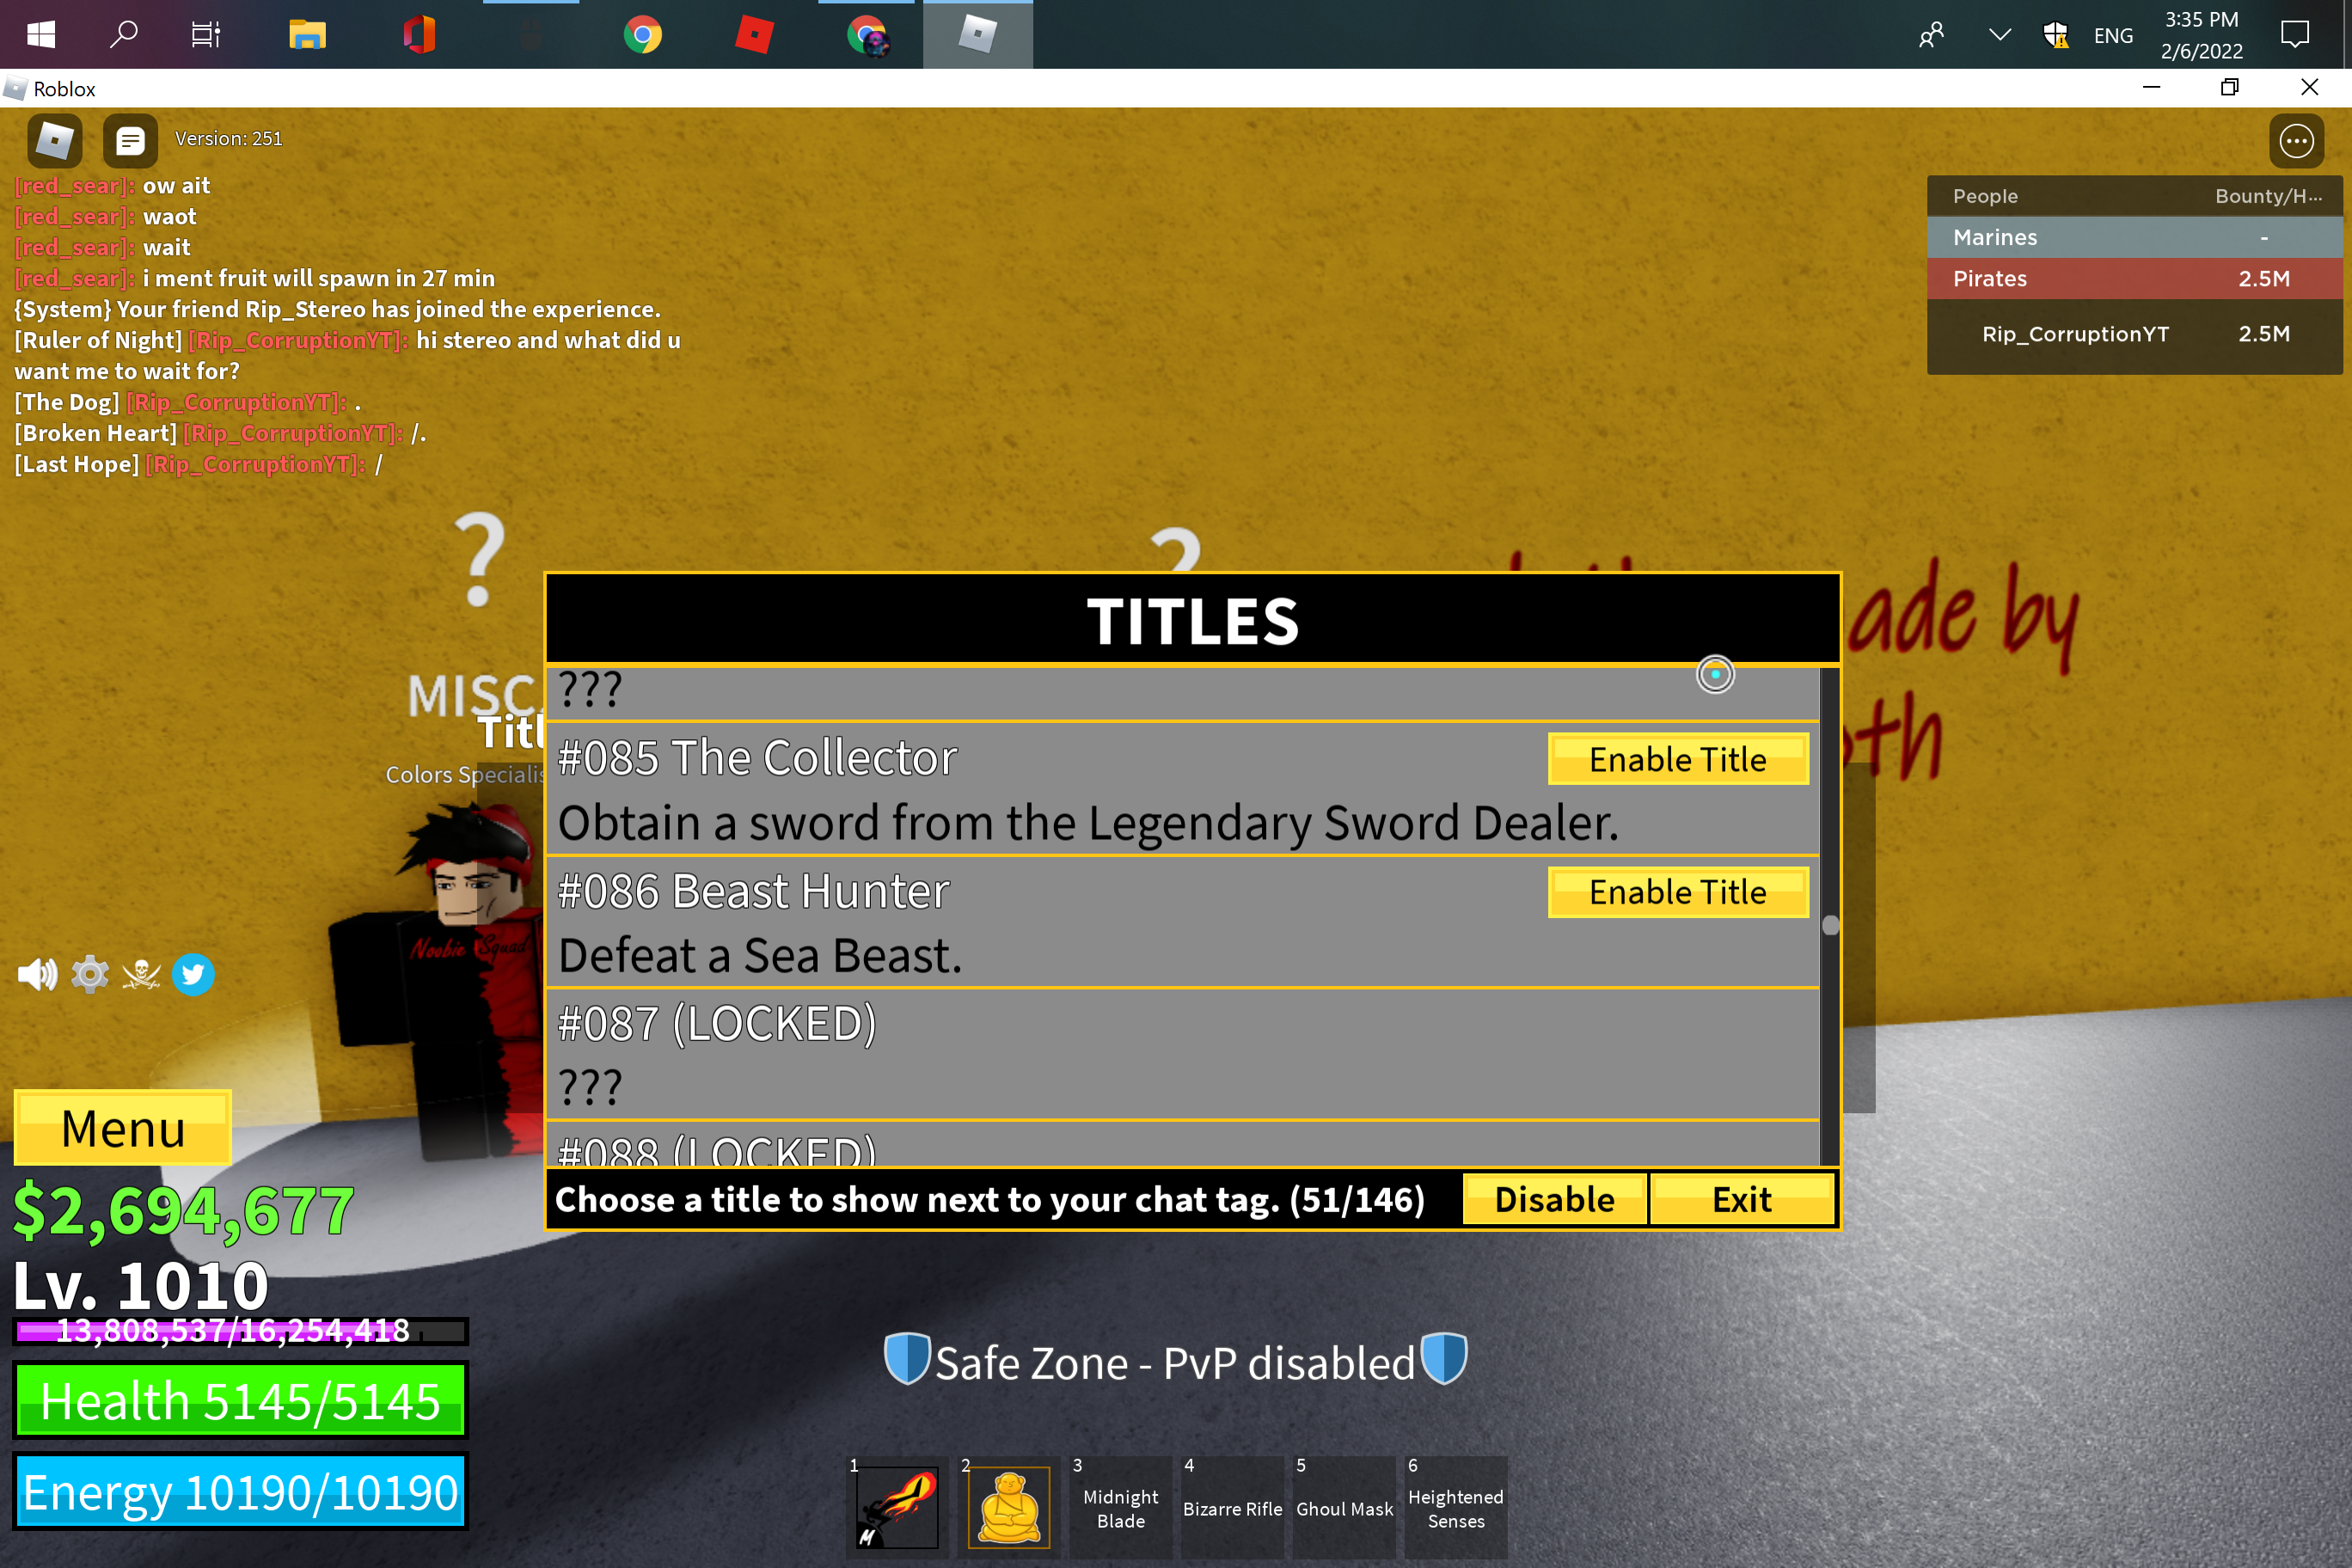 SO I TRIED TO GET ALL THE TITLES IN BLOX FRUITS! 